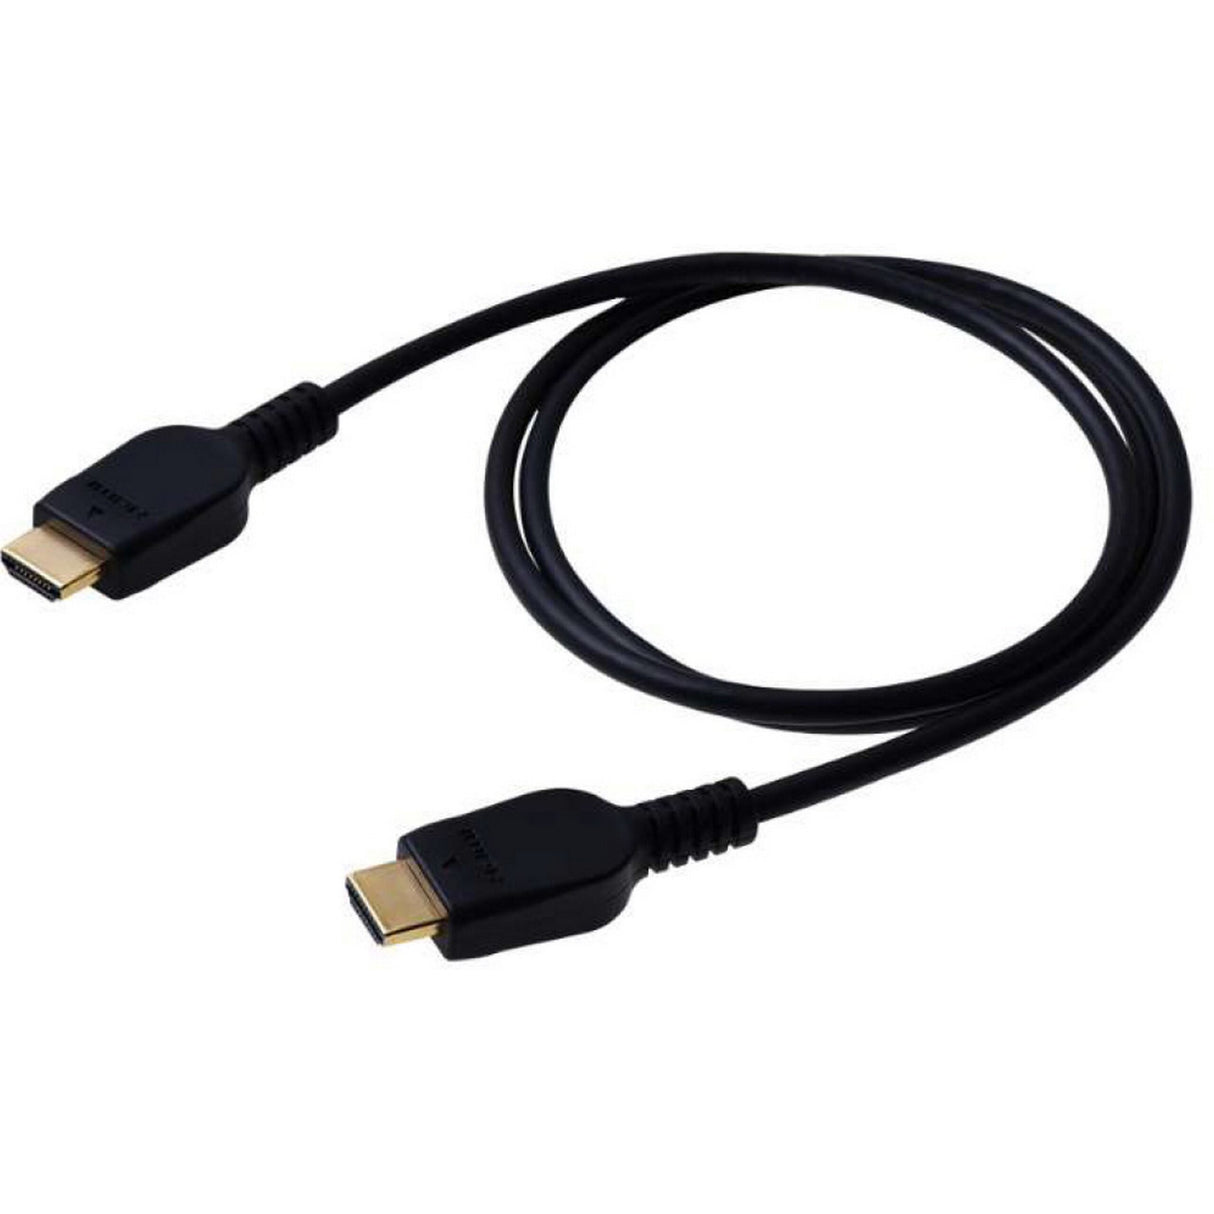 Connectronics Ultra High Speed HDMI 2.1 Cable for 4K/8K, 3 Meters